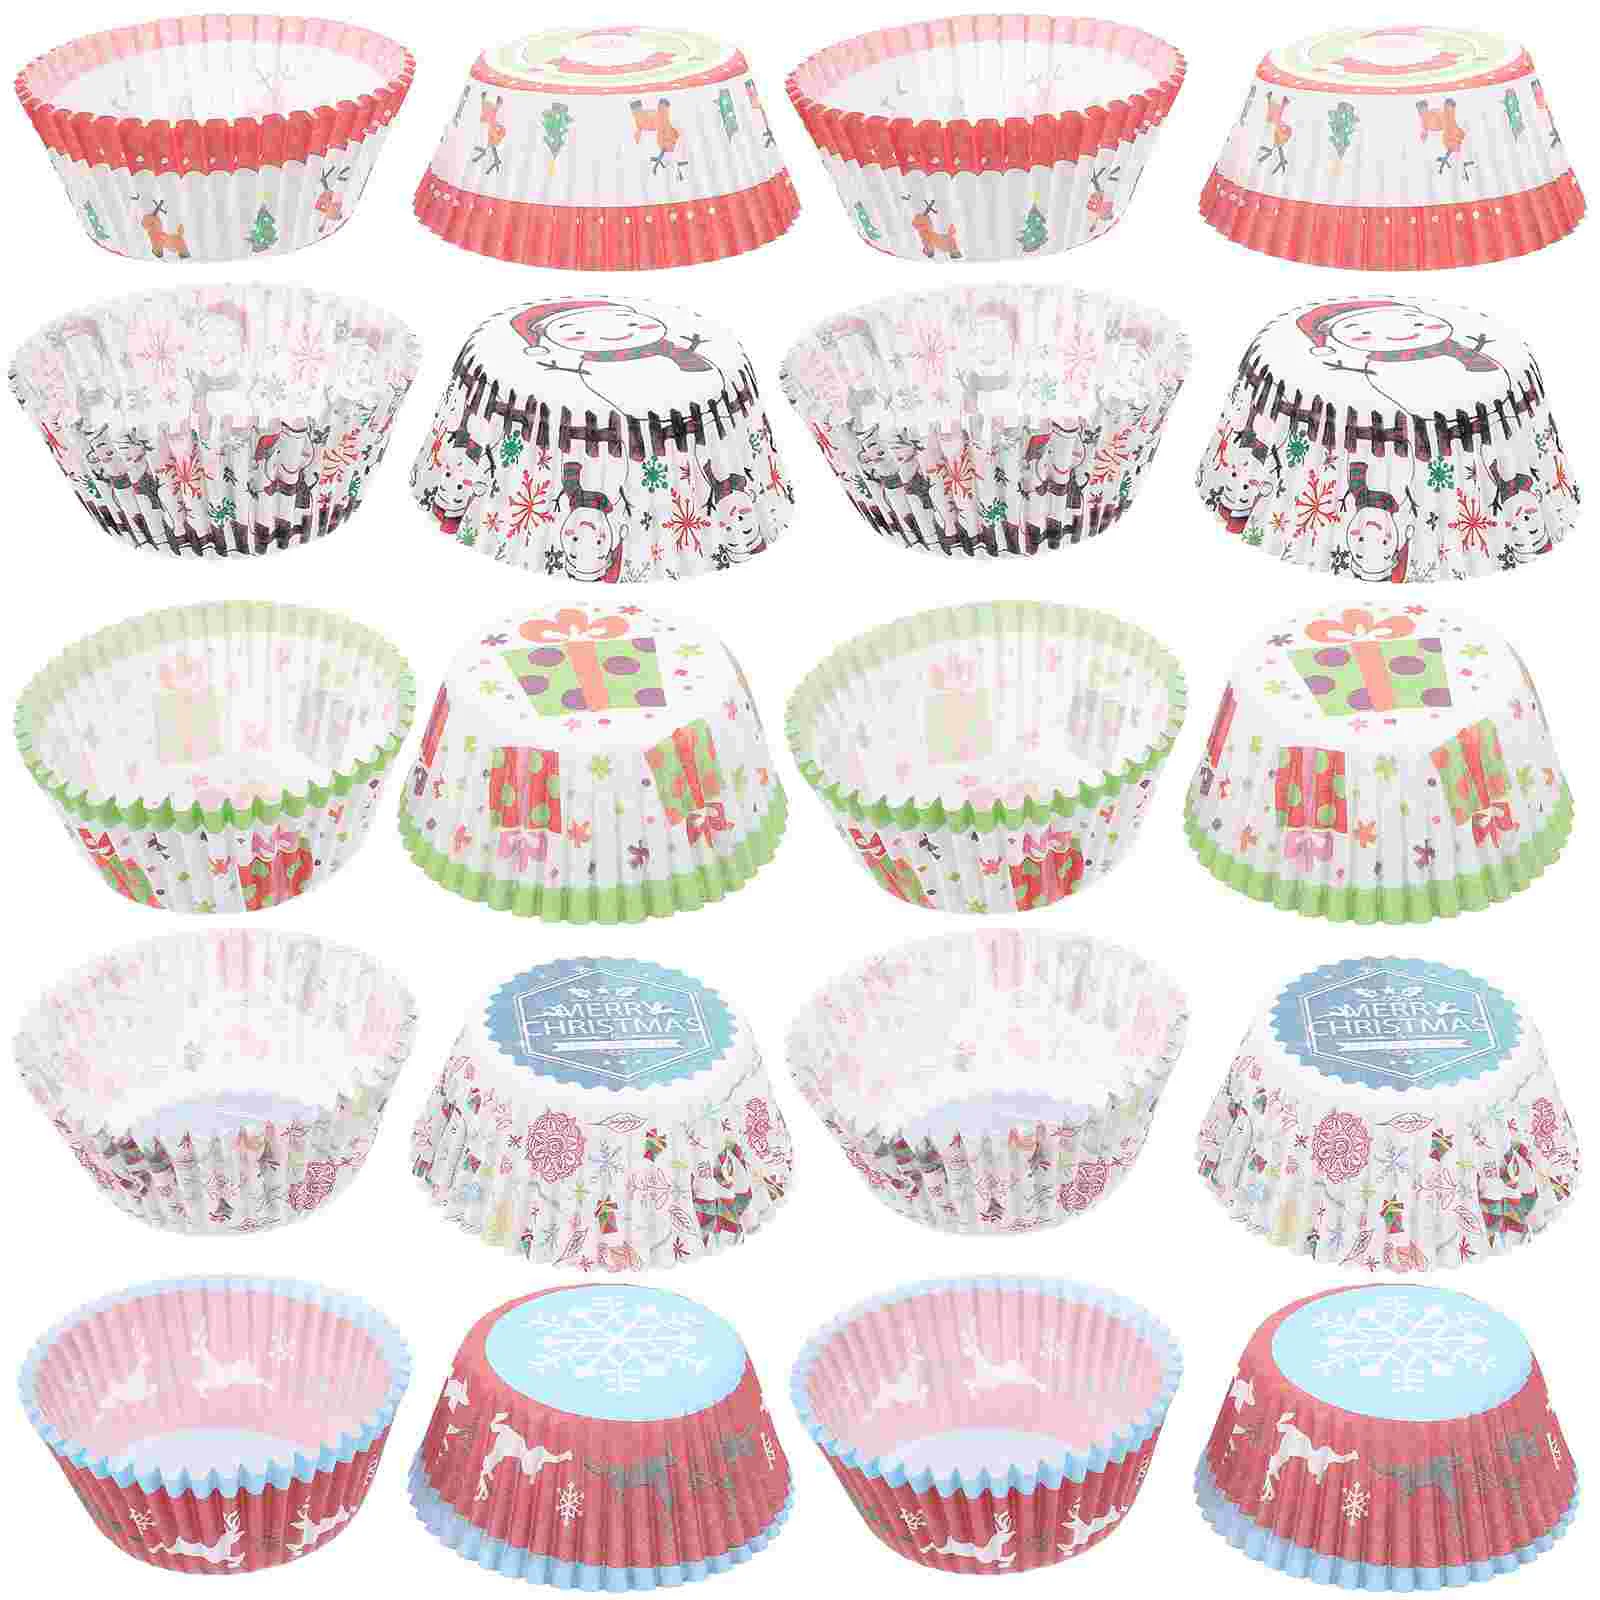 

500Pcs Christmas Themed Cupcake Baking Holders Food-grade Paper Muffin Wrappers Cake Cups